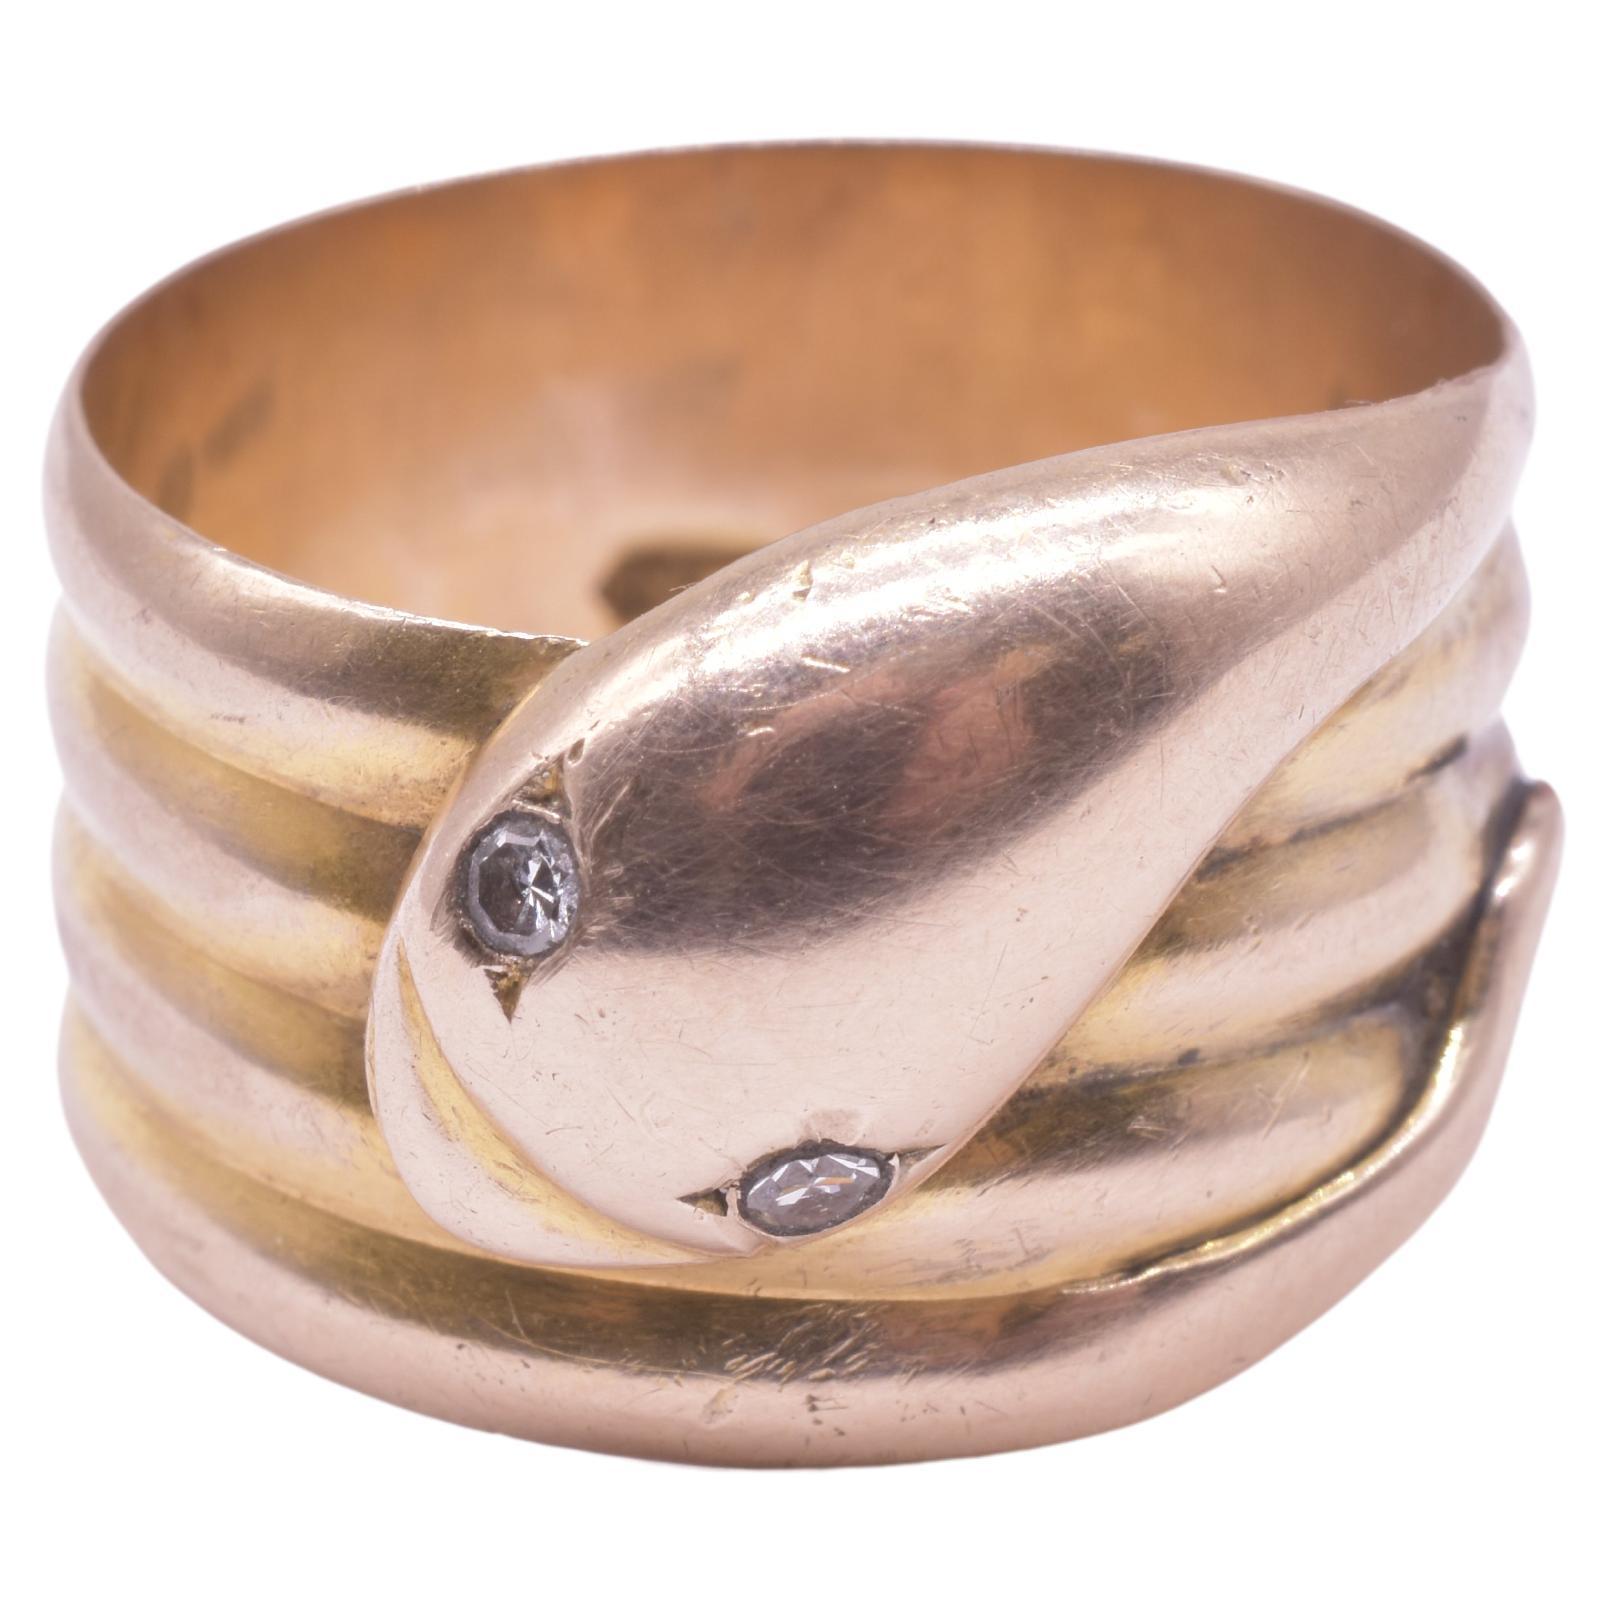 9K antique snake ring with the snake wrapped four times around and revealing a very cute snake expression and cute round diamond eyes encased in a carved setting. The ring is hallmarked Birmingham 1910. The snake with its tail in its mouth, an